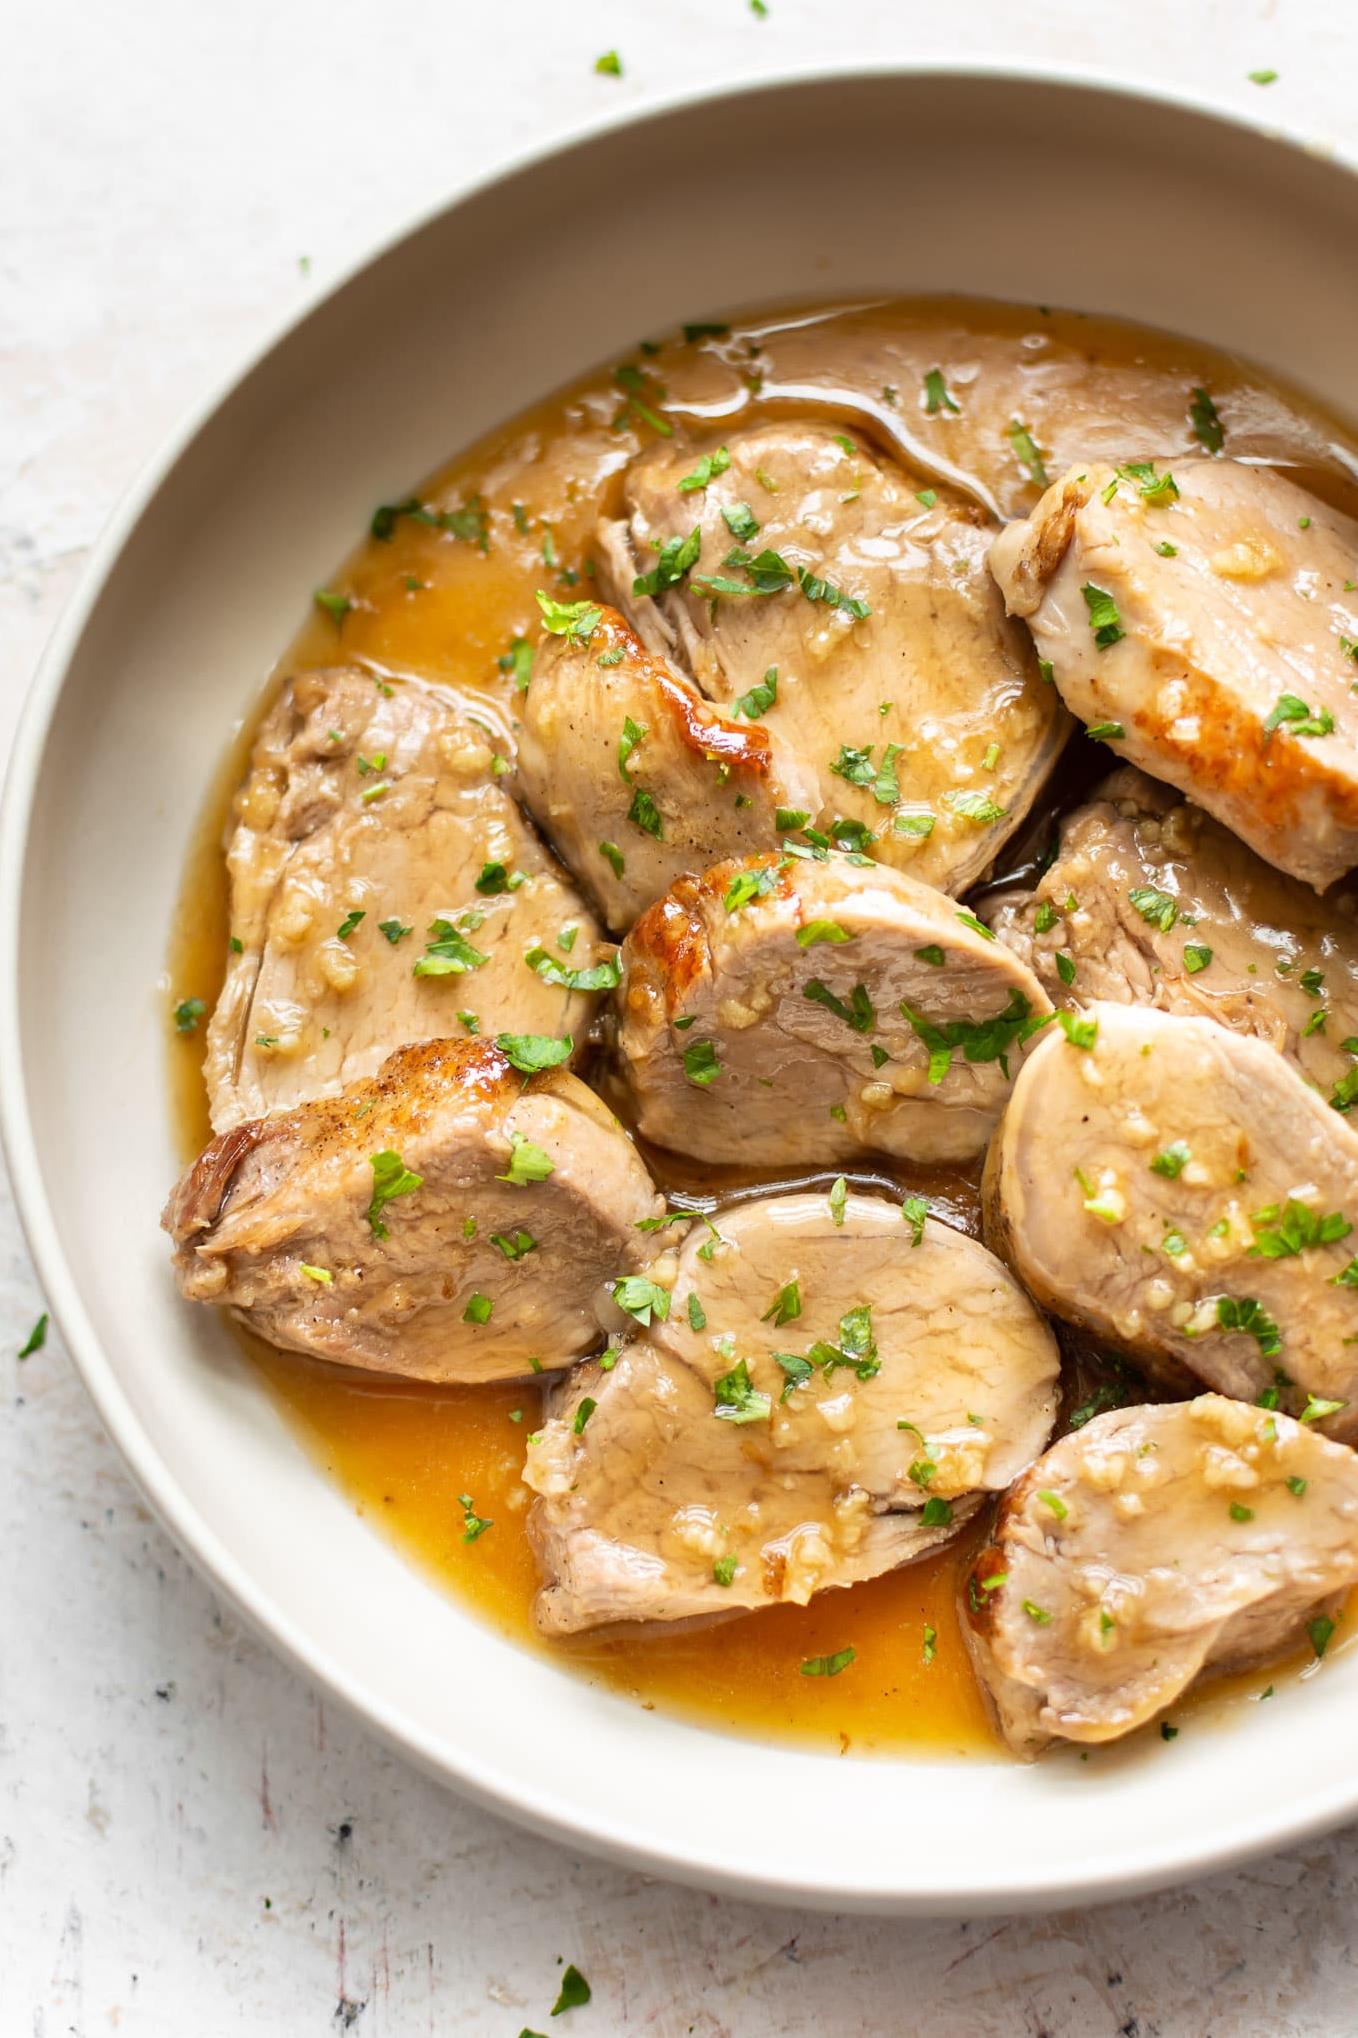  Nothing beats the smell of garlic and pork cooking together in the Instant Pot.